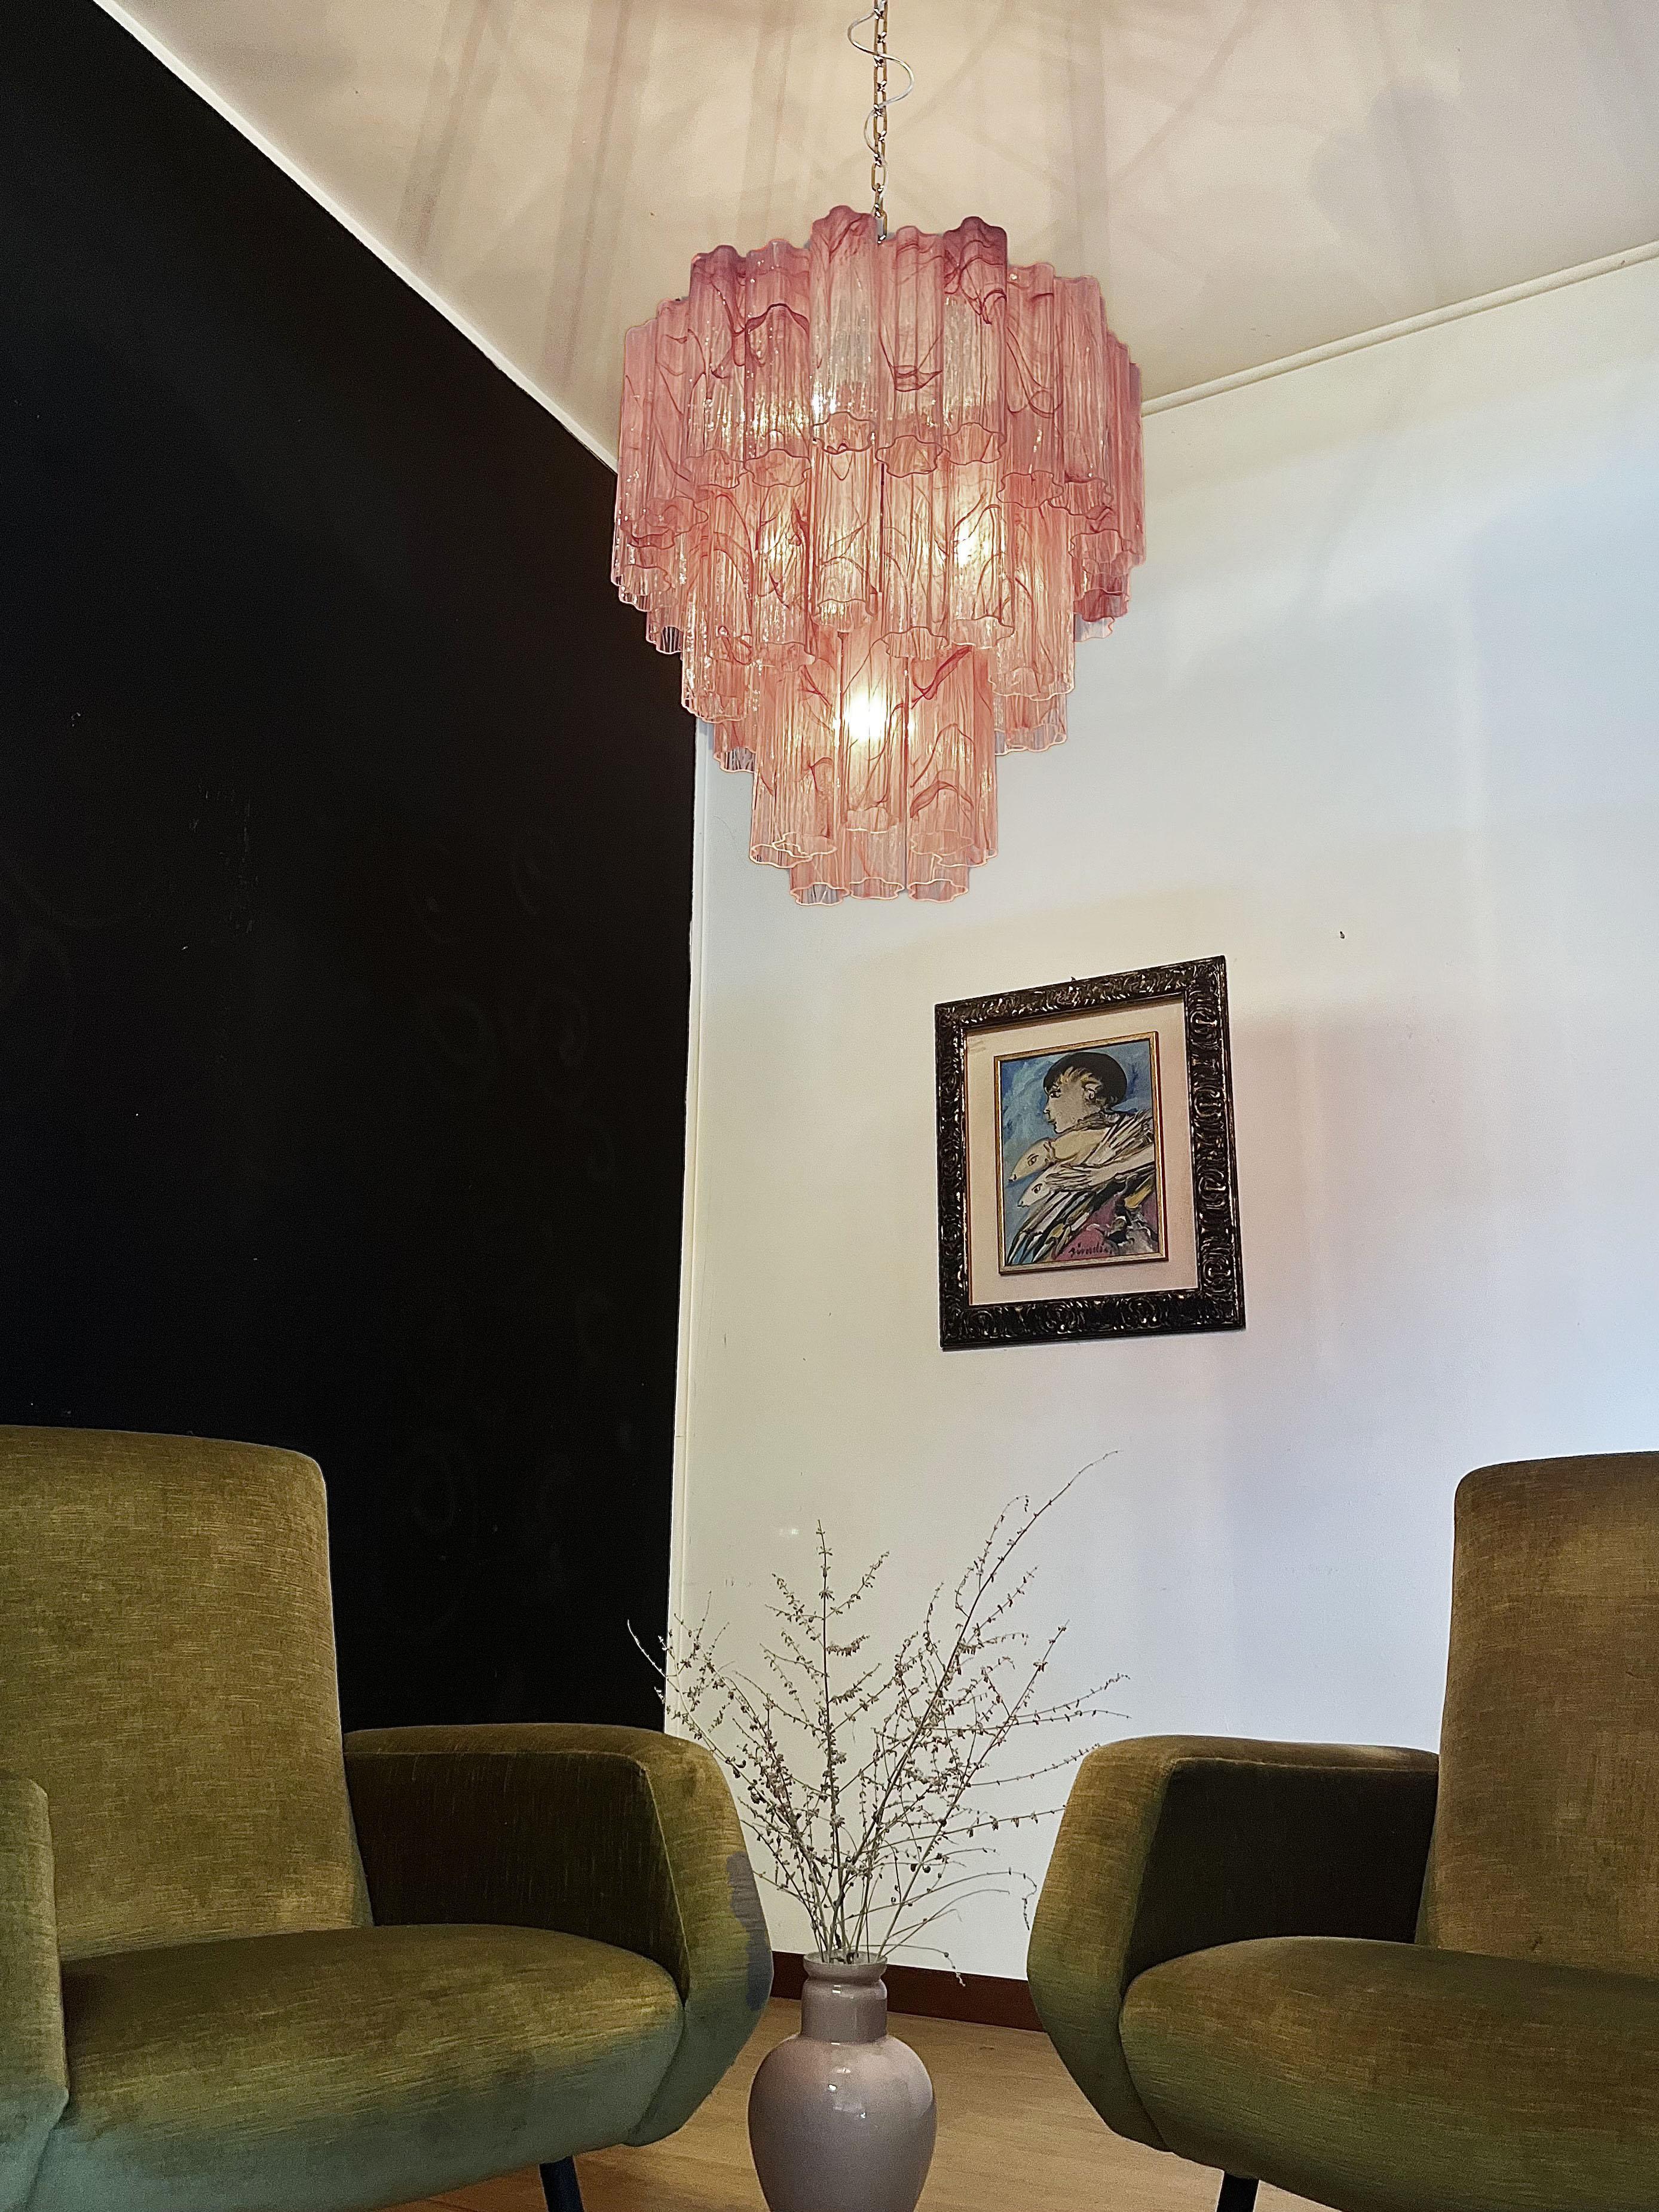 20th Century Large Three-Tier Murano Glass Tube Chandelier, Pink Albaster